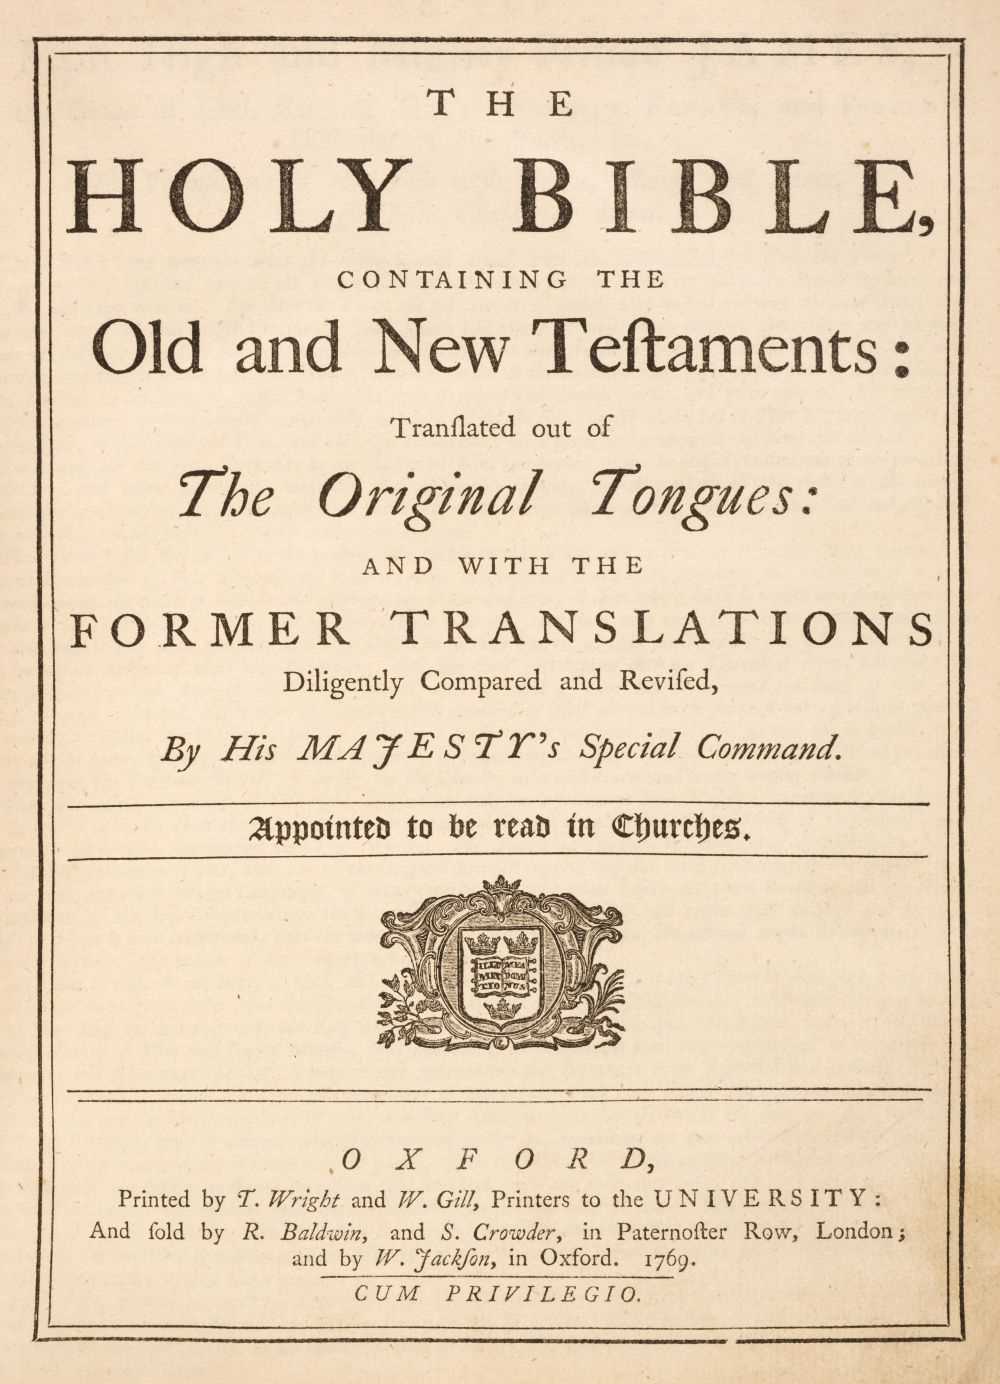 Lot 80 - Bible [English]. The Holy Bible, containing the Old and New Testaments, Oxford, 1769